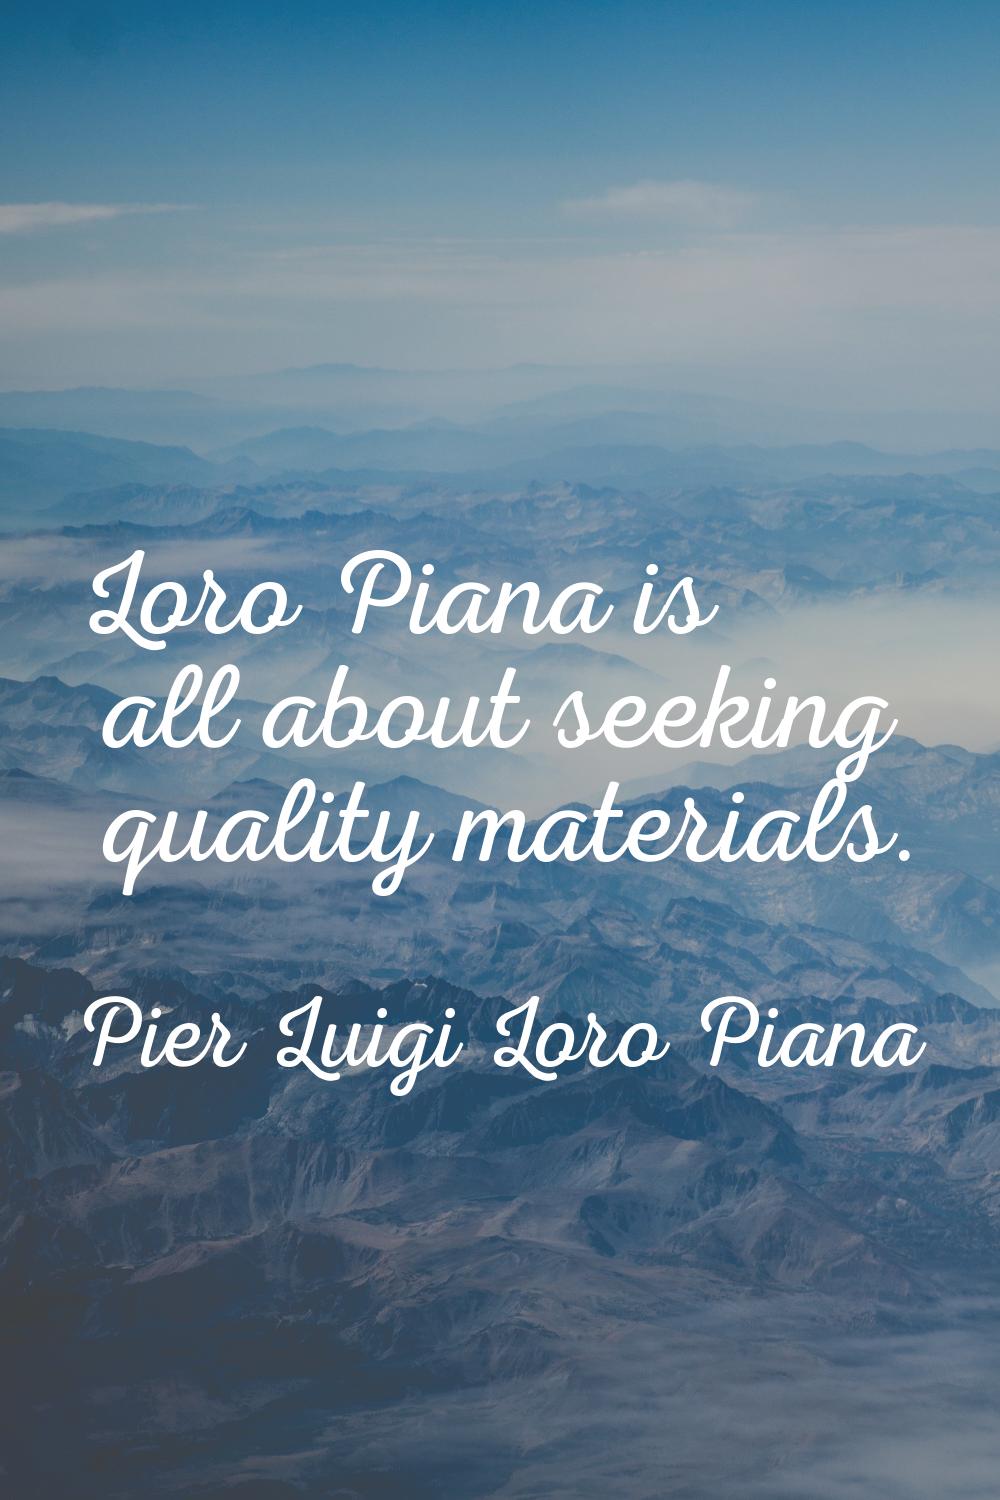 Loro Piana is all about seeking quality materials.